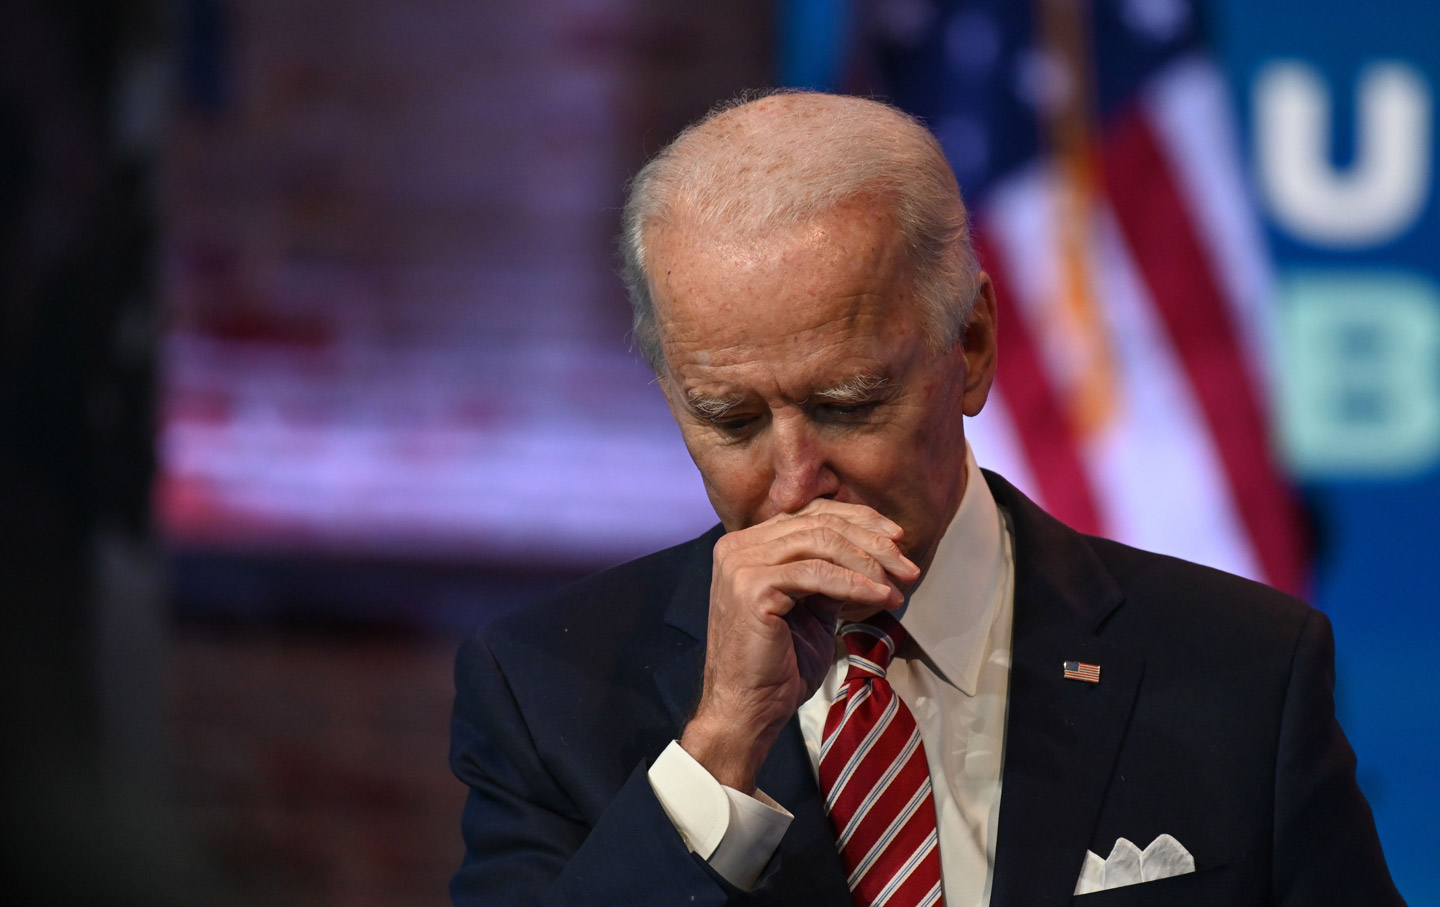 What Biden Can Do About the Israeli-Palestinian Mess He’ll Inherit